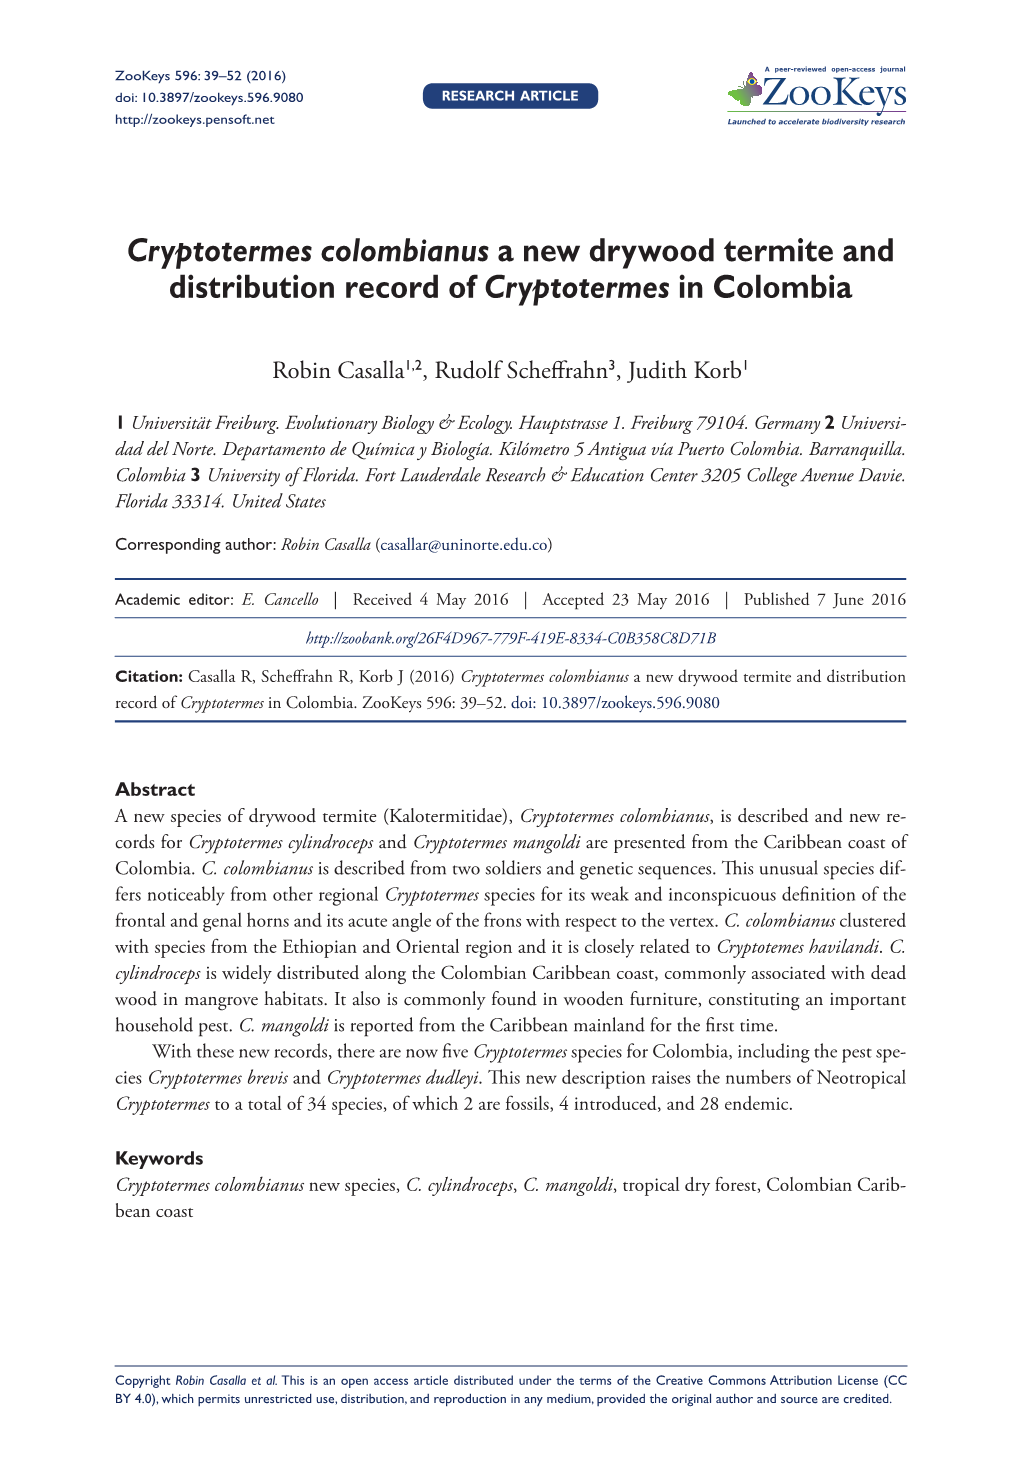 Cryptotermes Colombianus a New Drywood Termite and Distribution Record of Cryptotermes in Colombia